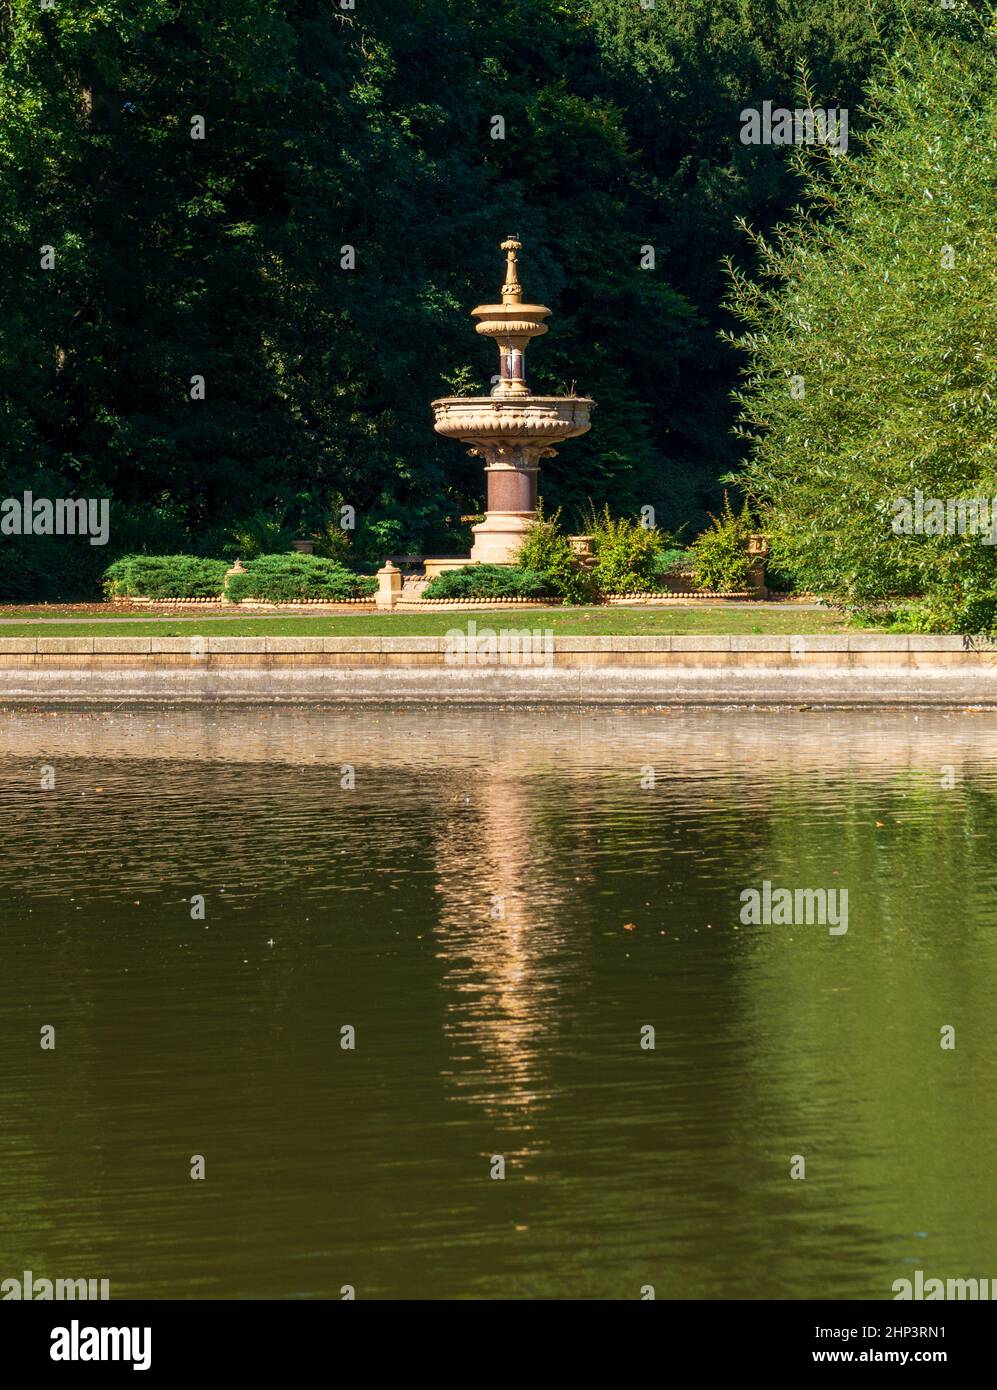 The Victorian teracotta fountain in South Park in Darlington reflected in the lake Stock Photo